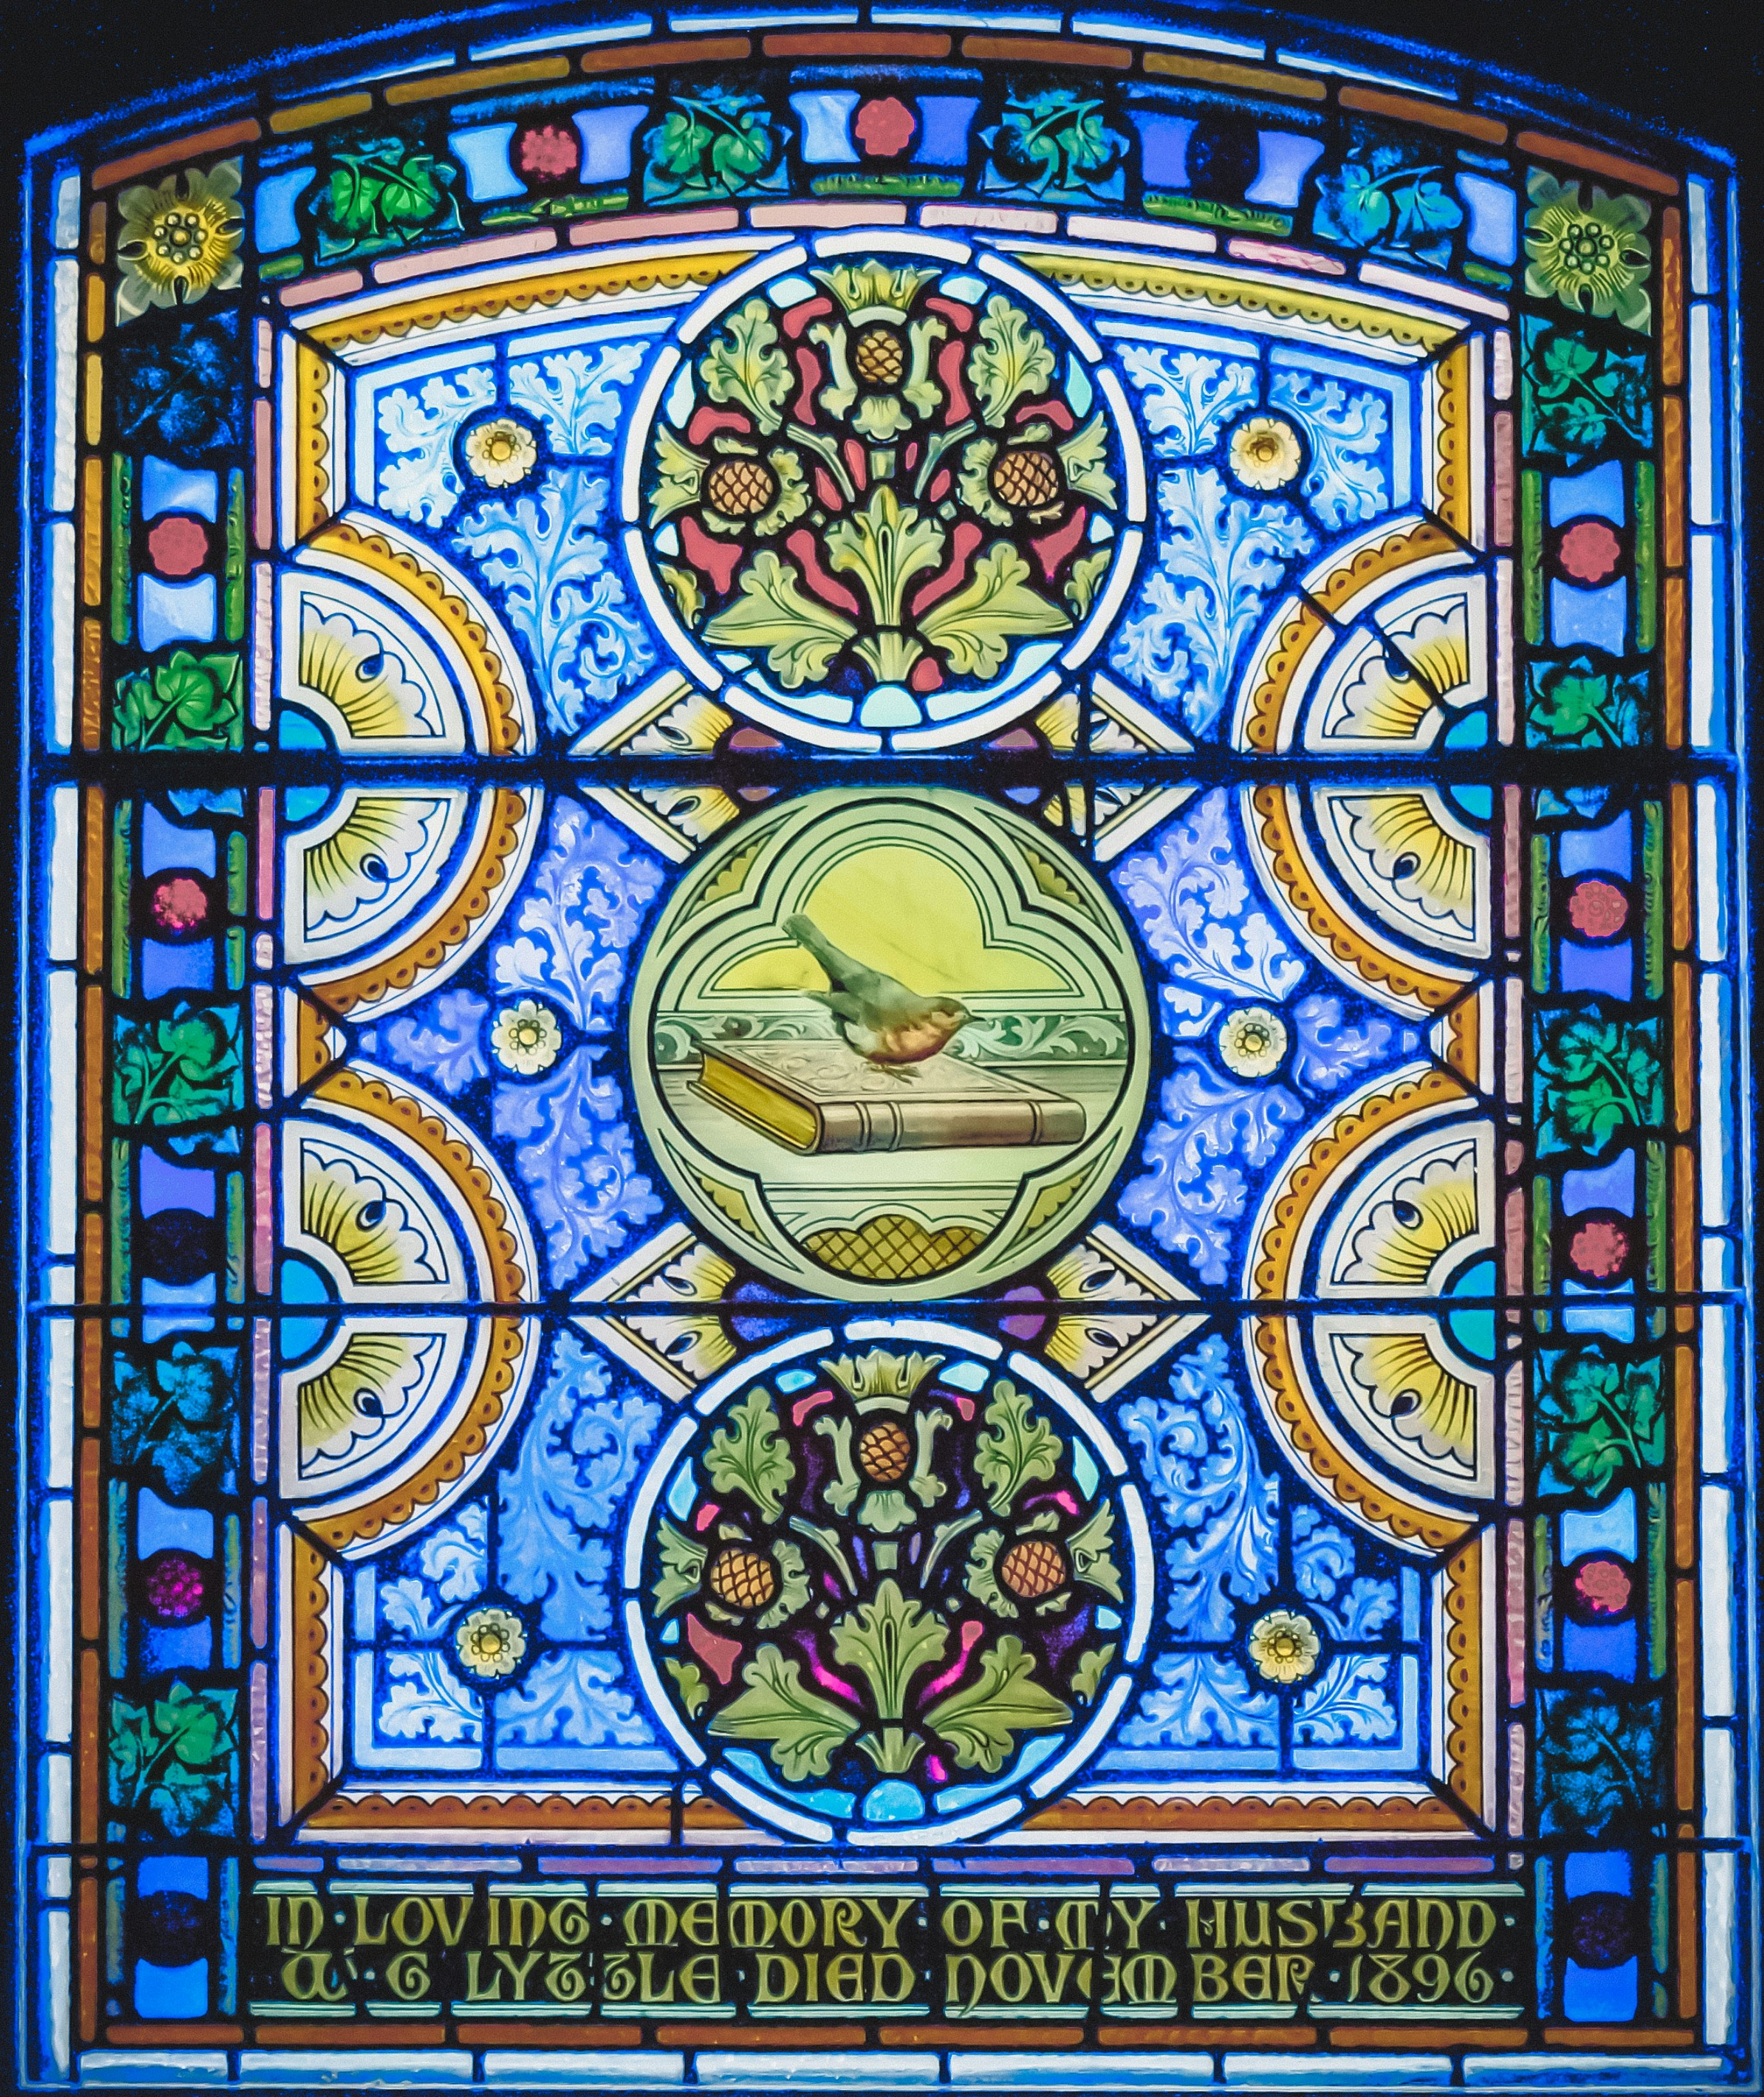 Stained-glass window in the First Presbyterian Church memorializing the death Mr. Lyzzle in 1896.